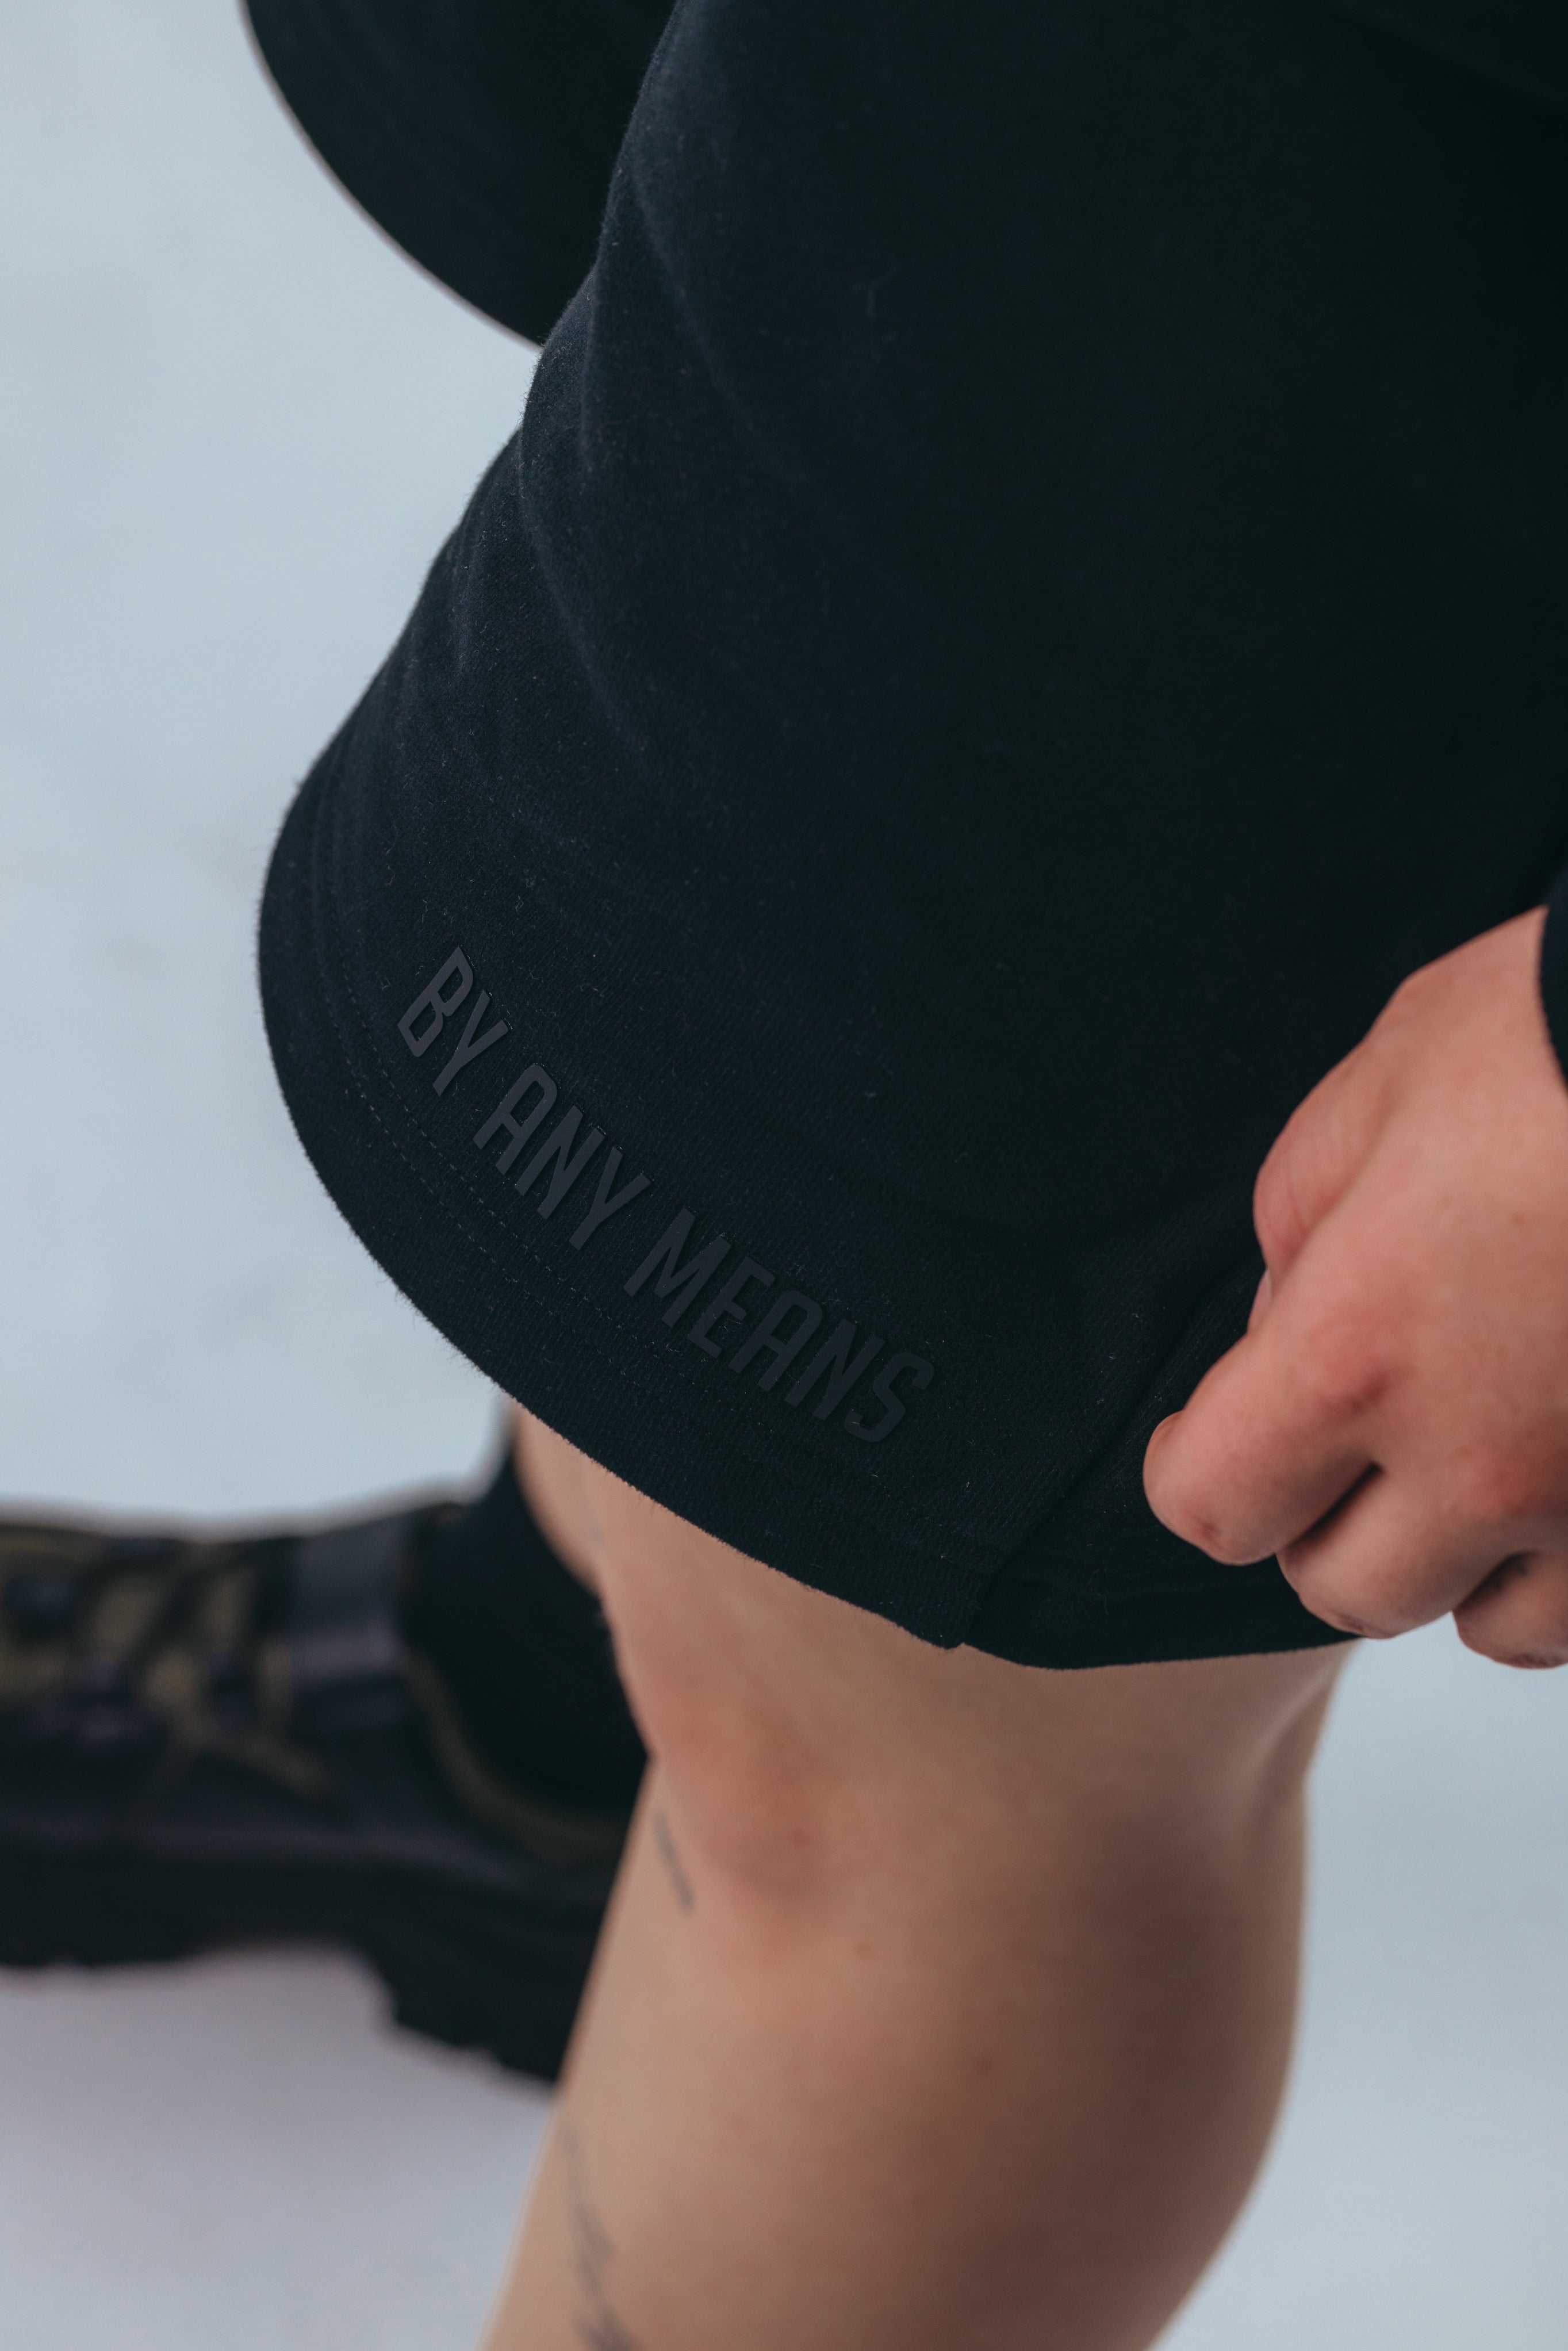 Our staple trackshorts.  Featuring a fleece inner, thick cotton and rubber logo detailing.